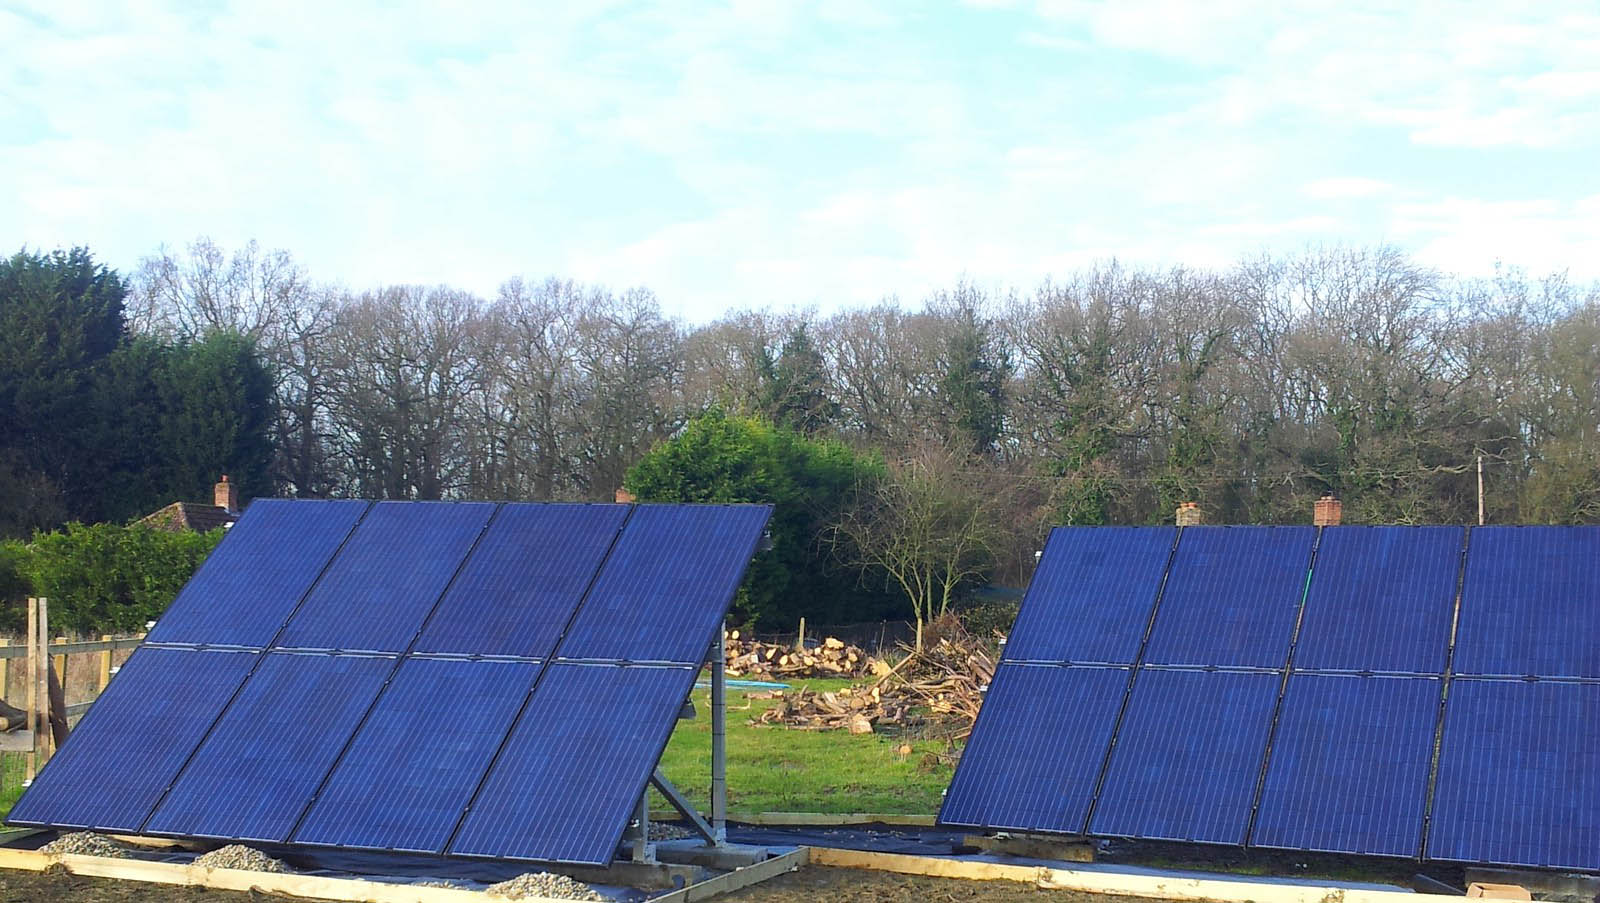 Solar farm near Cambridge generating large amount of electricity for the houses nearby